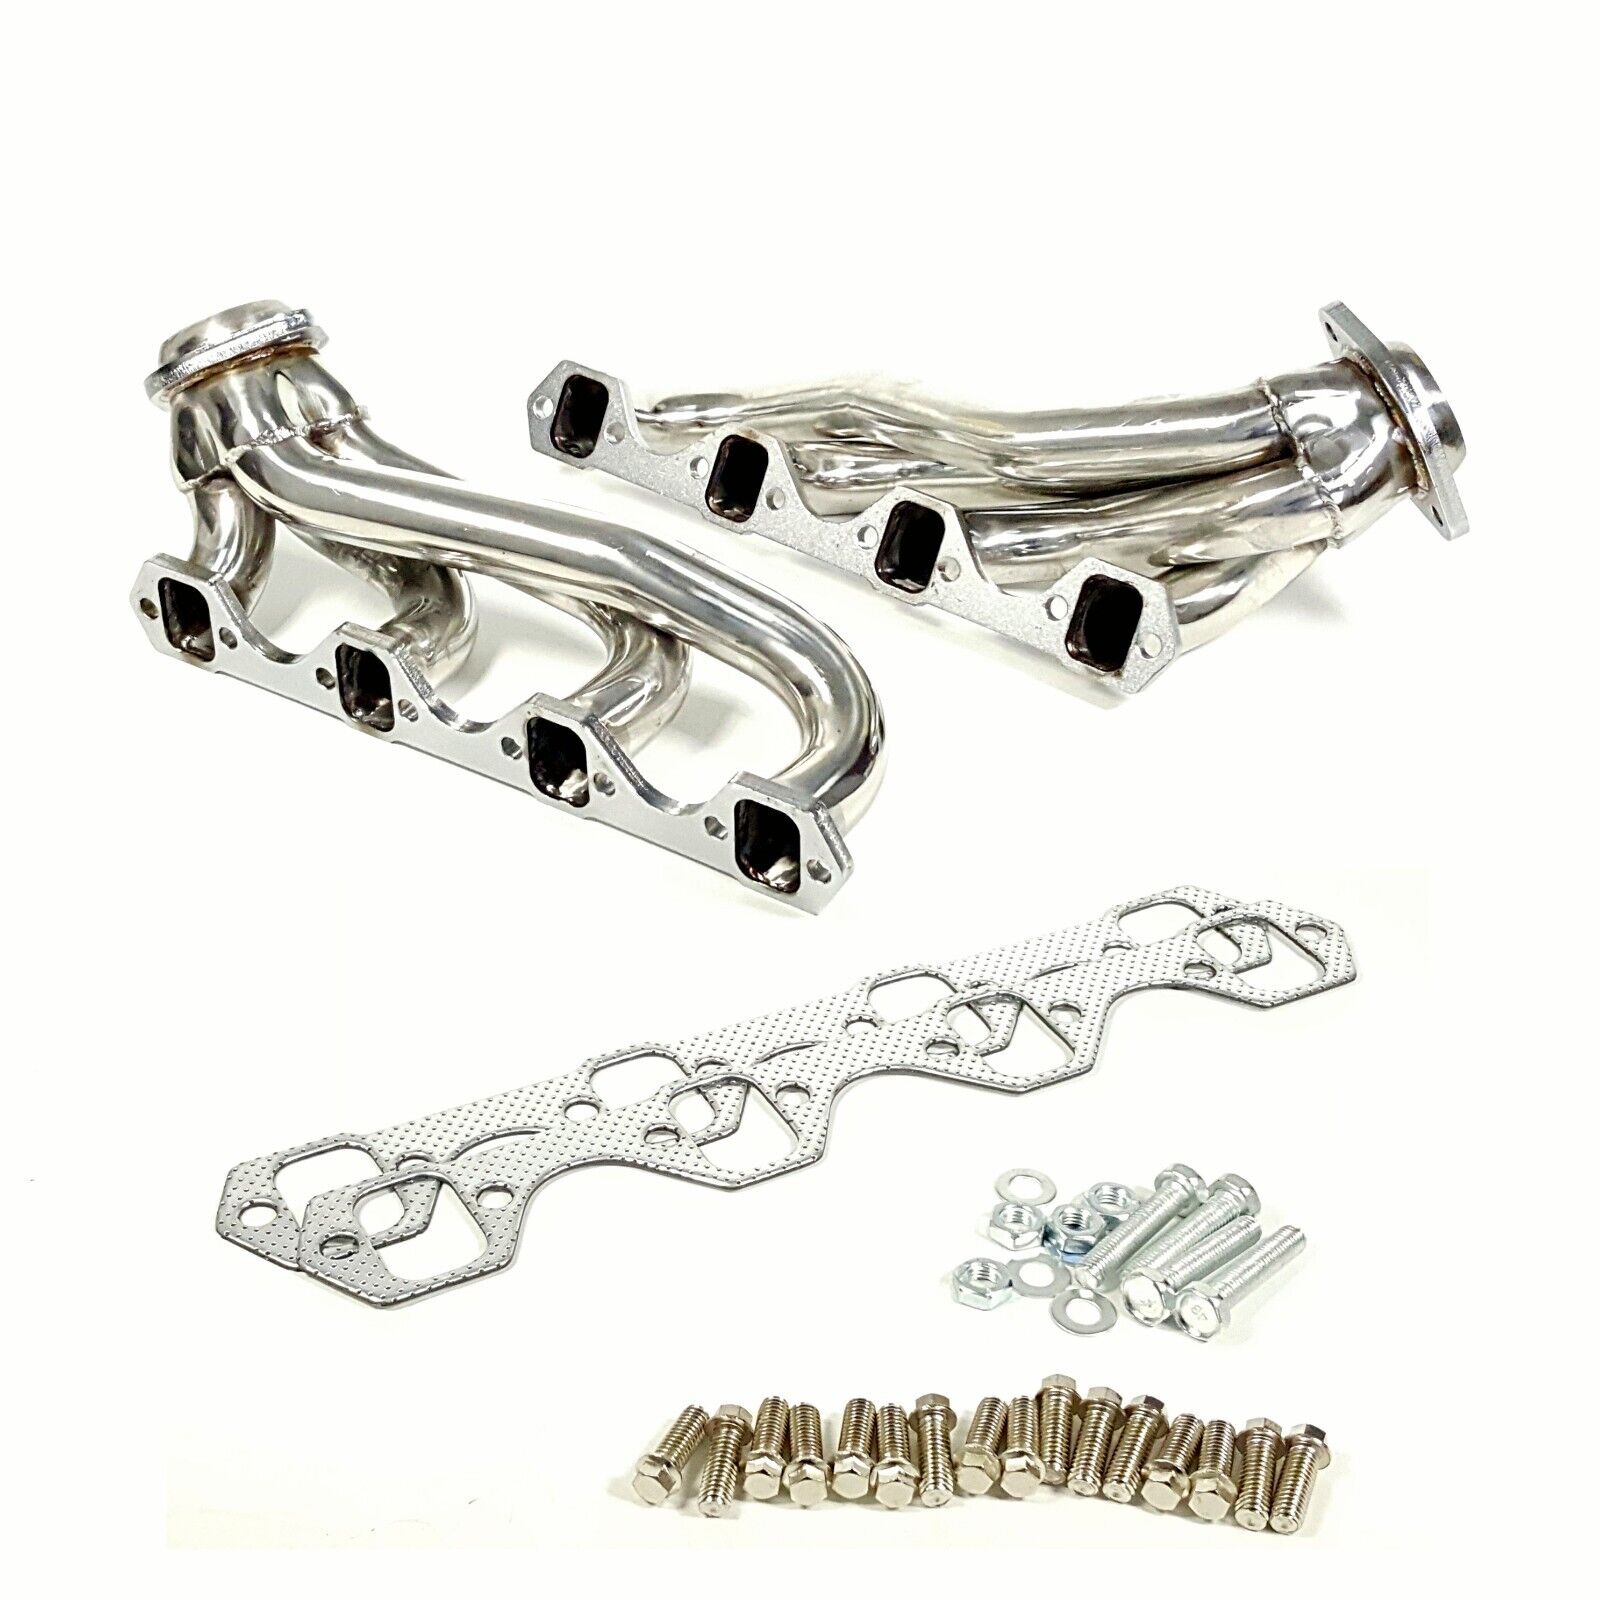 Exhaust Headers for 86-93 Ford Mustang Fox Body 5.0L GT/LX Cobra V8 302ci engine